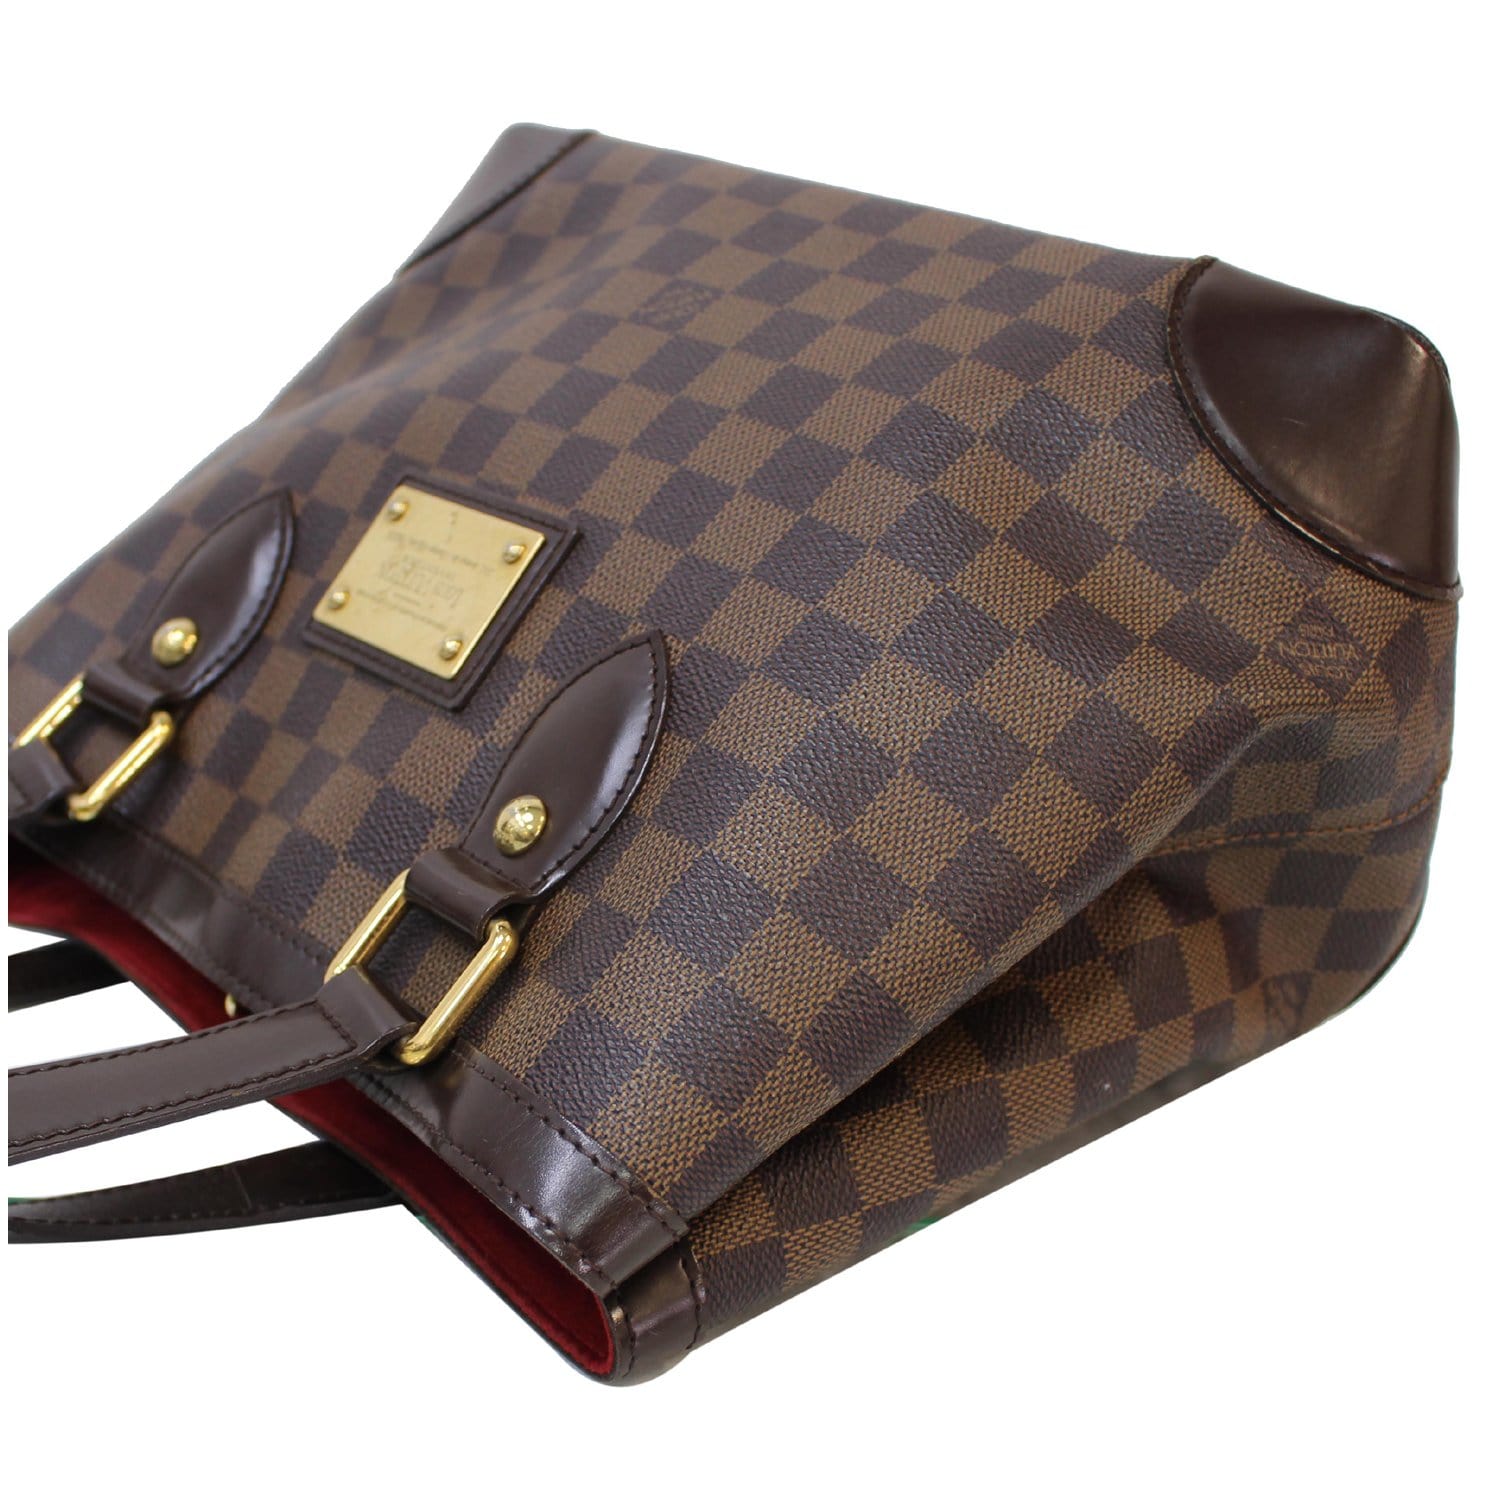 Louis Vuitton 2008 pre-owned Hampstead PM tote bag